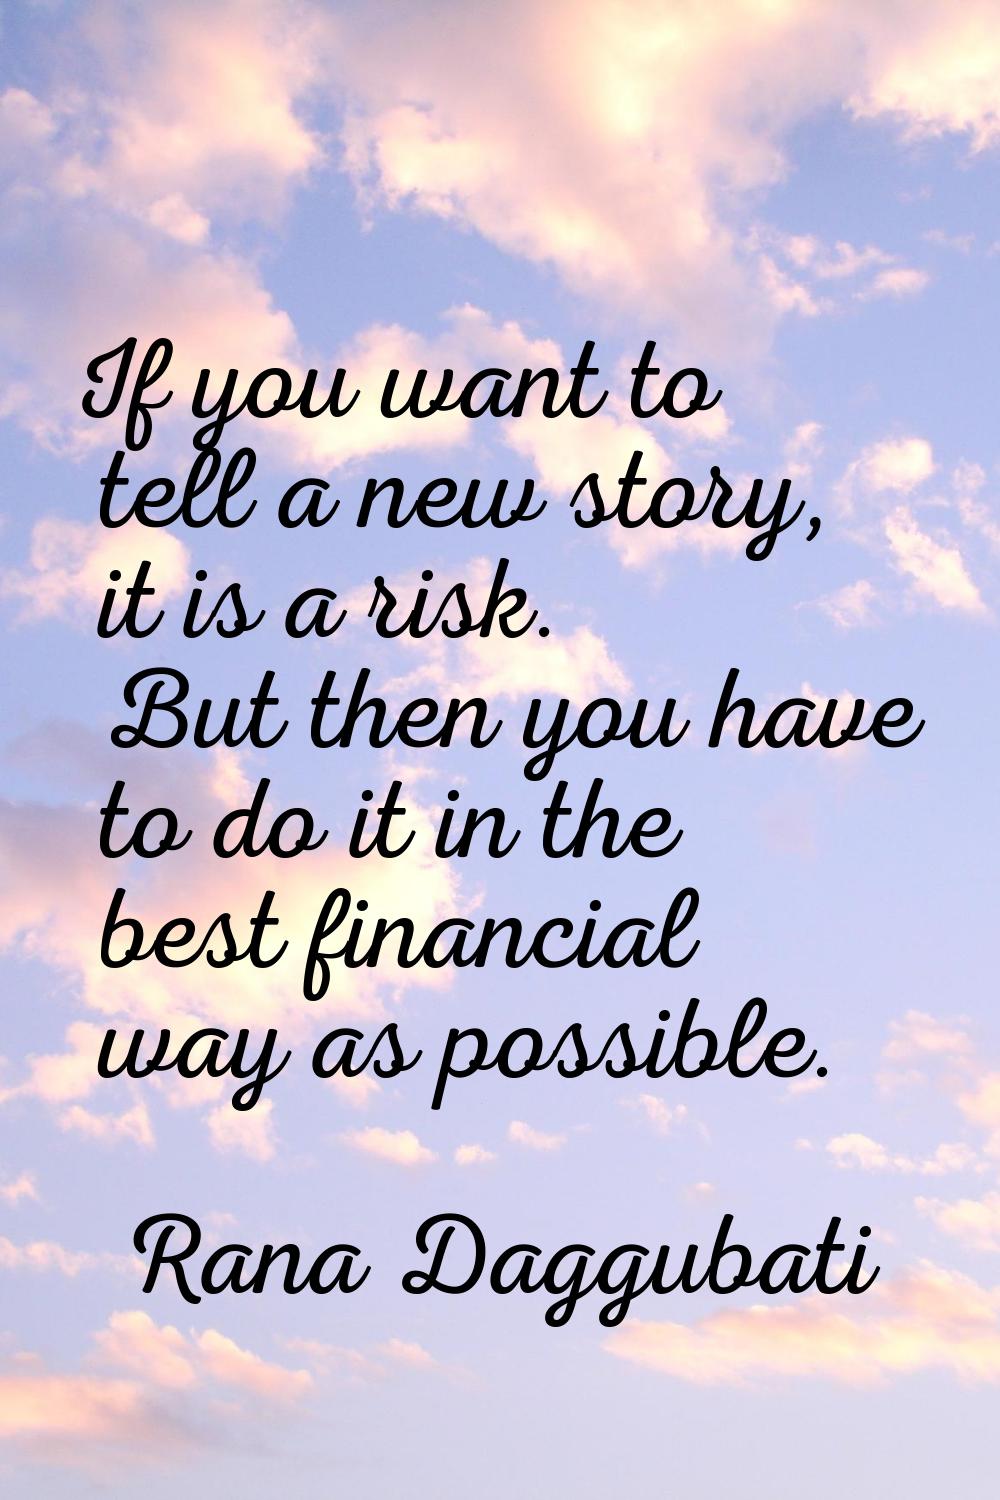 If you want to tell a new story, it is a risk. But then you have to do it in the best financial way